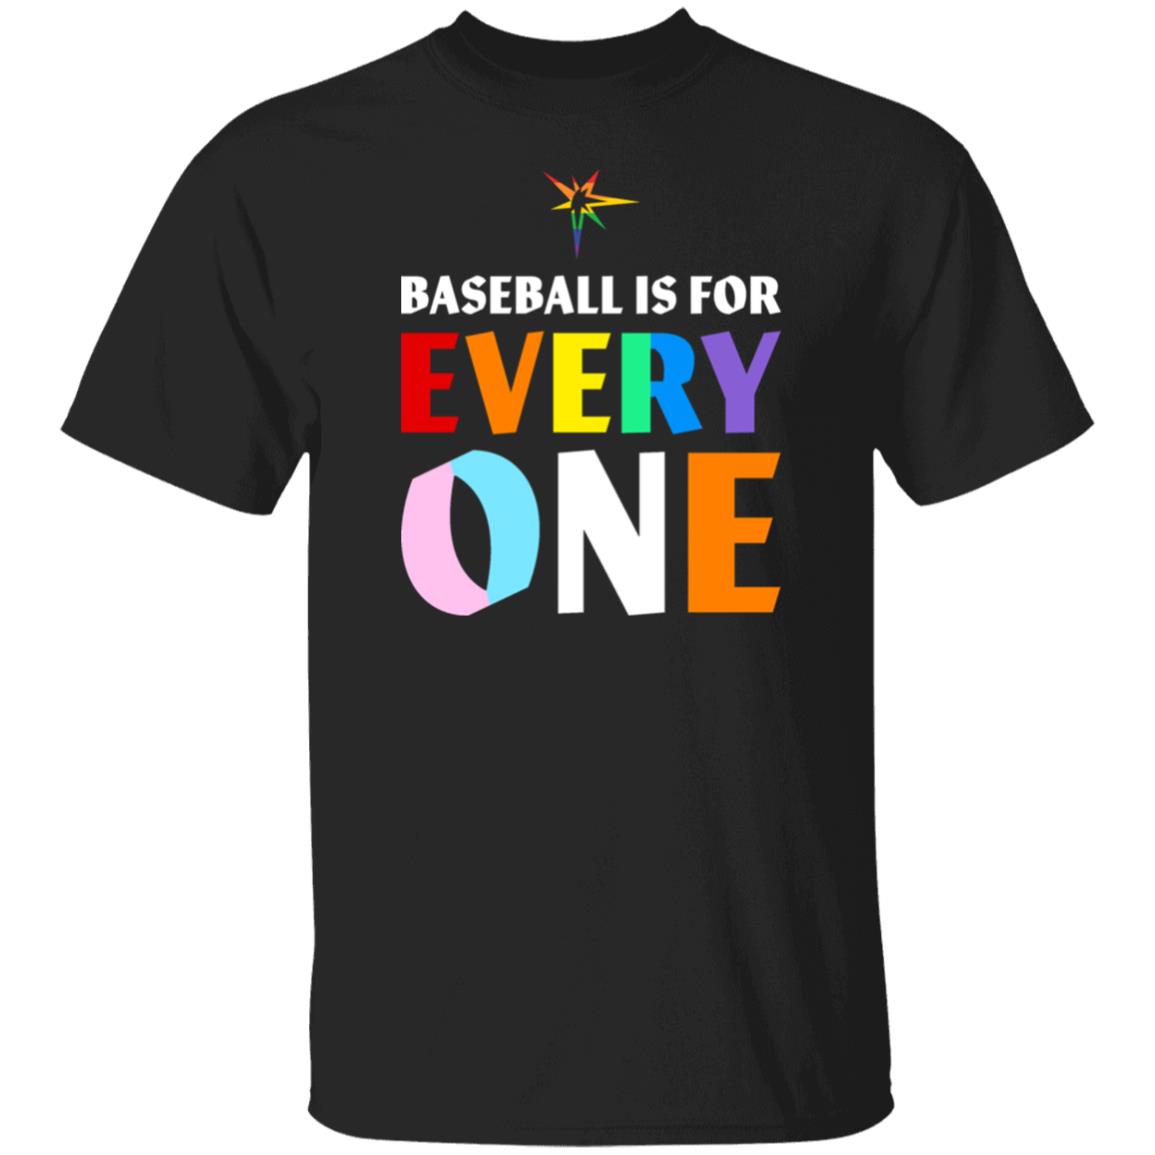 Baseball Is For Every One Shirt Pride Tampa Bay Rays